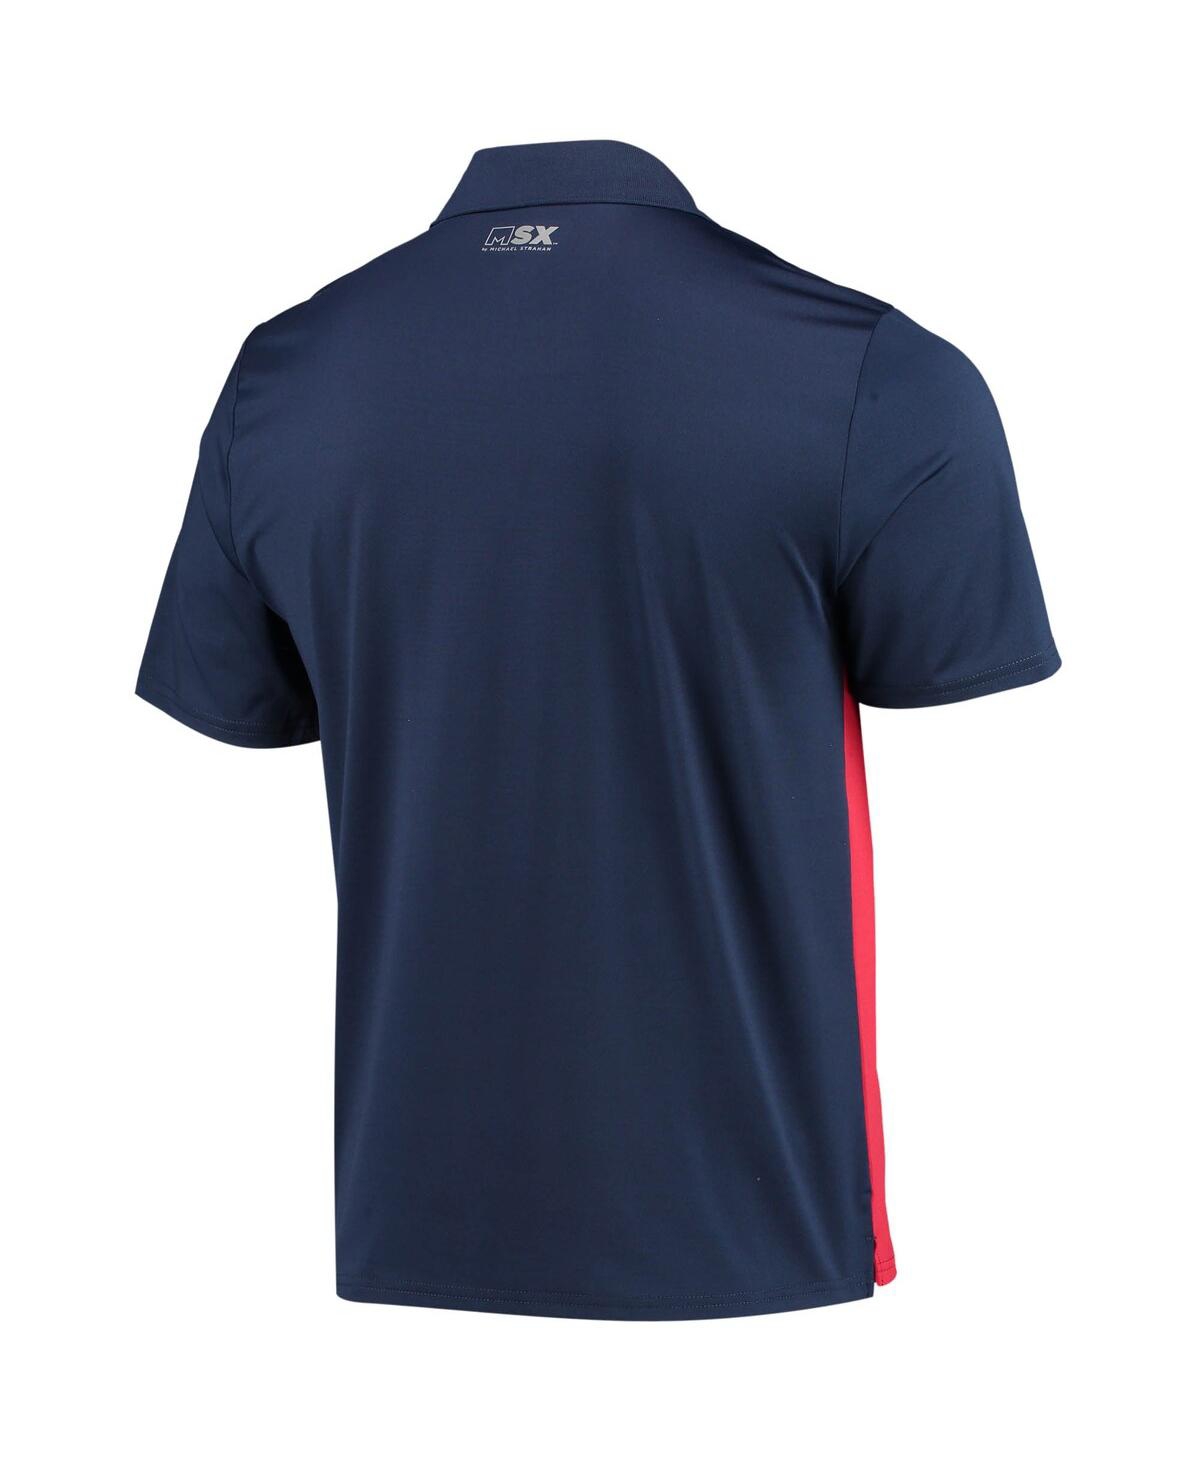 Shop Msx By Michael Strahan Men's  Red, Navy New England Patriots Challenge Color Block Performance Polo S In Red,navy